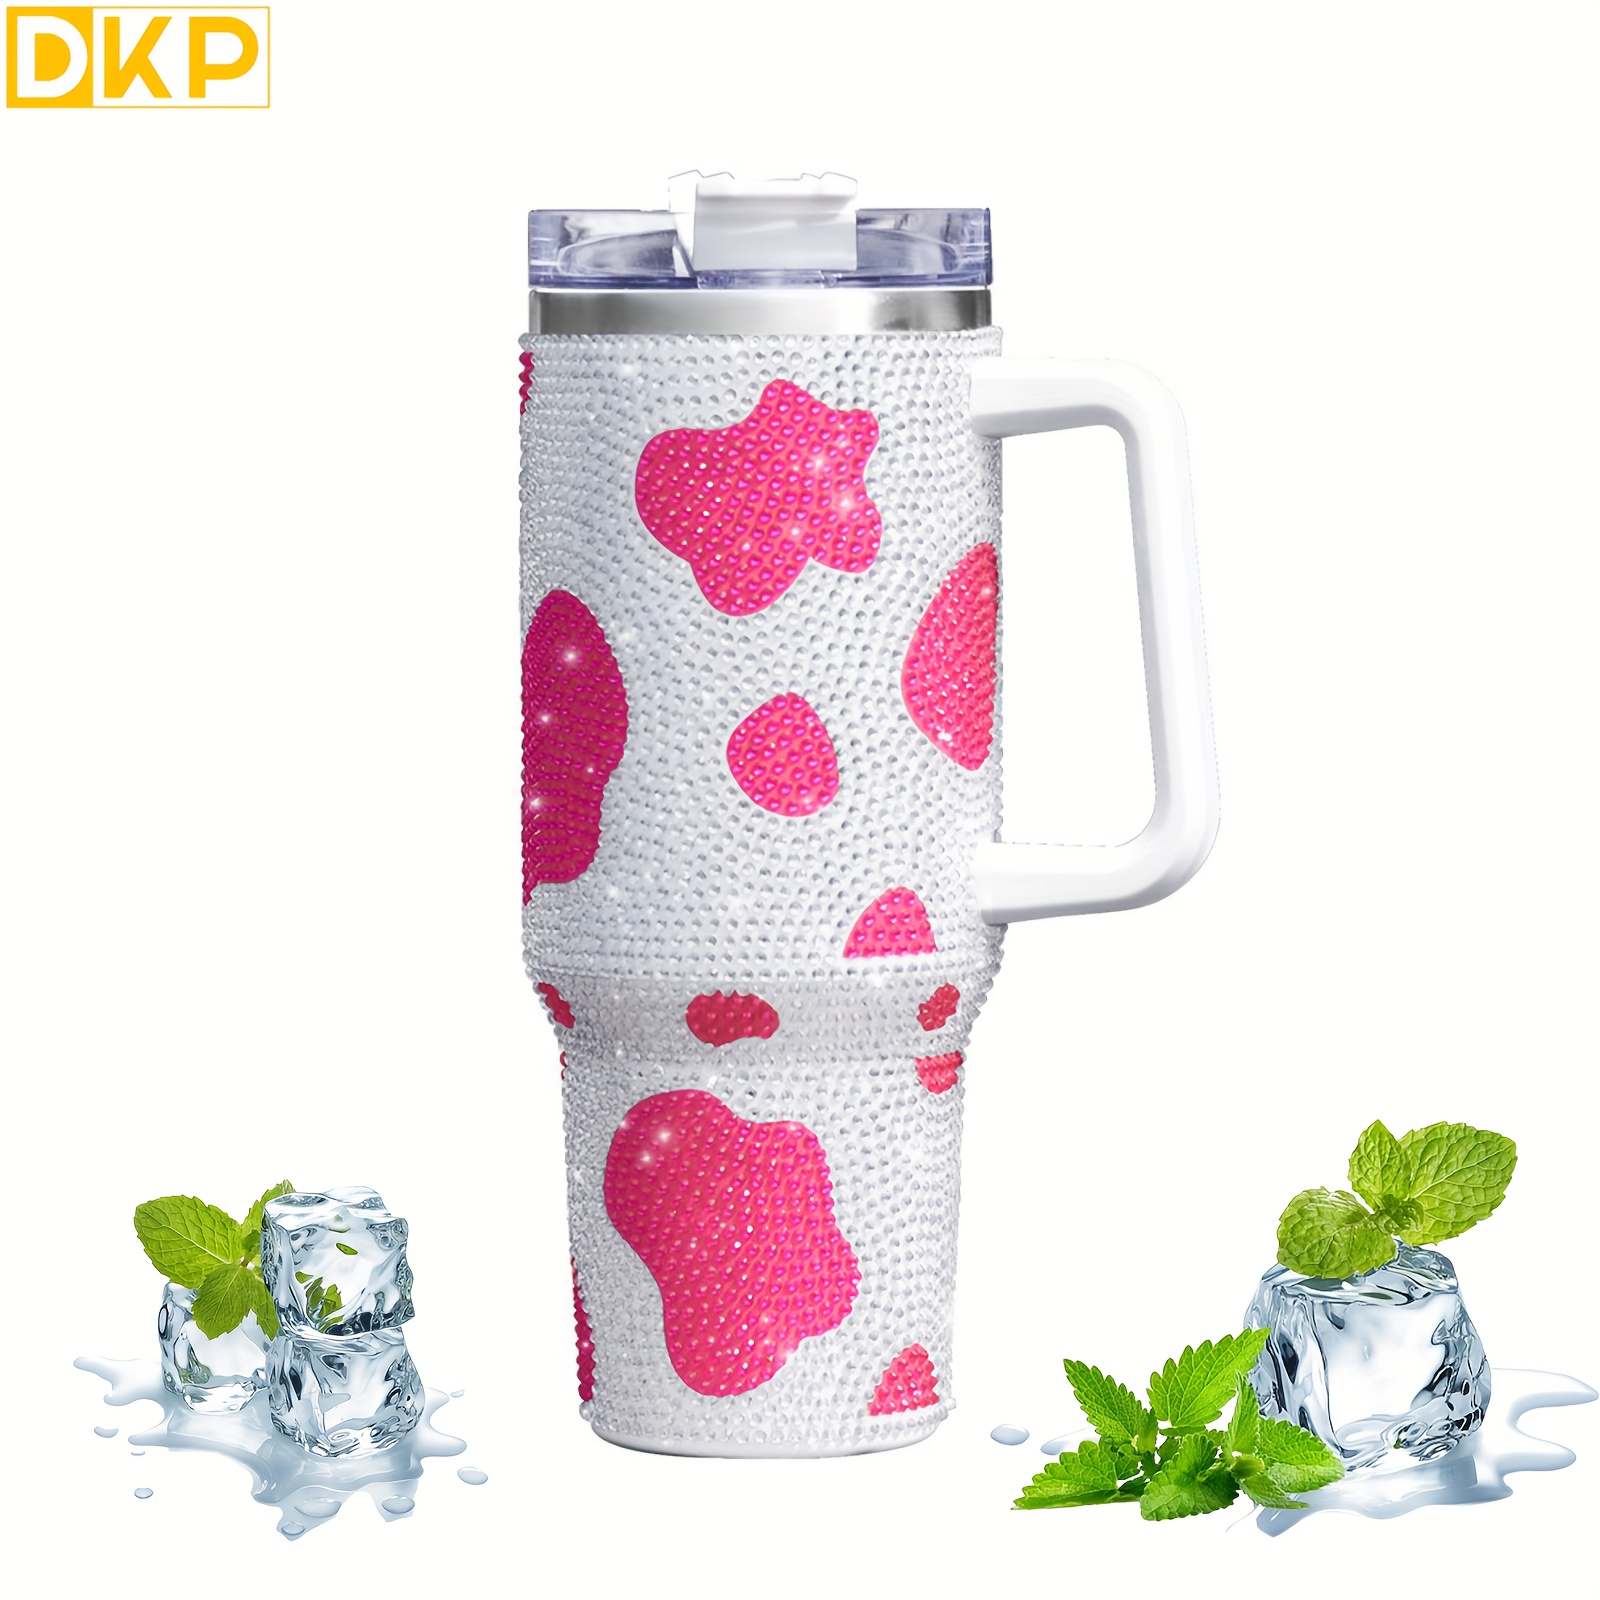 1pcs DKP 40oz Large Capacity Tumbler Water Bottle With Handle And